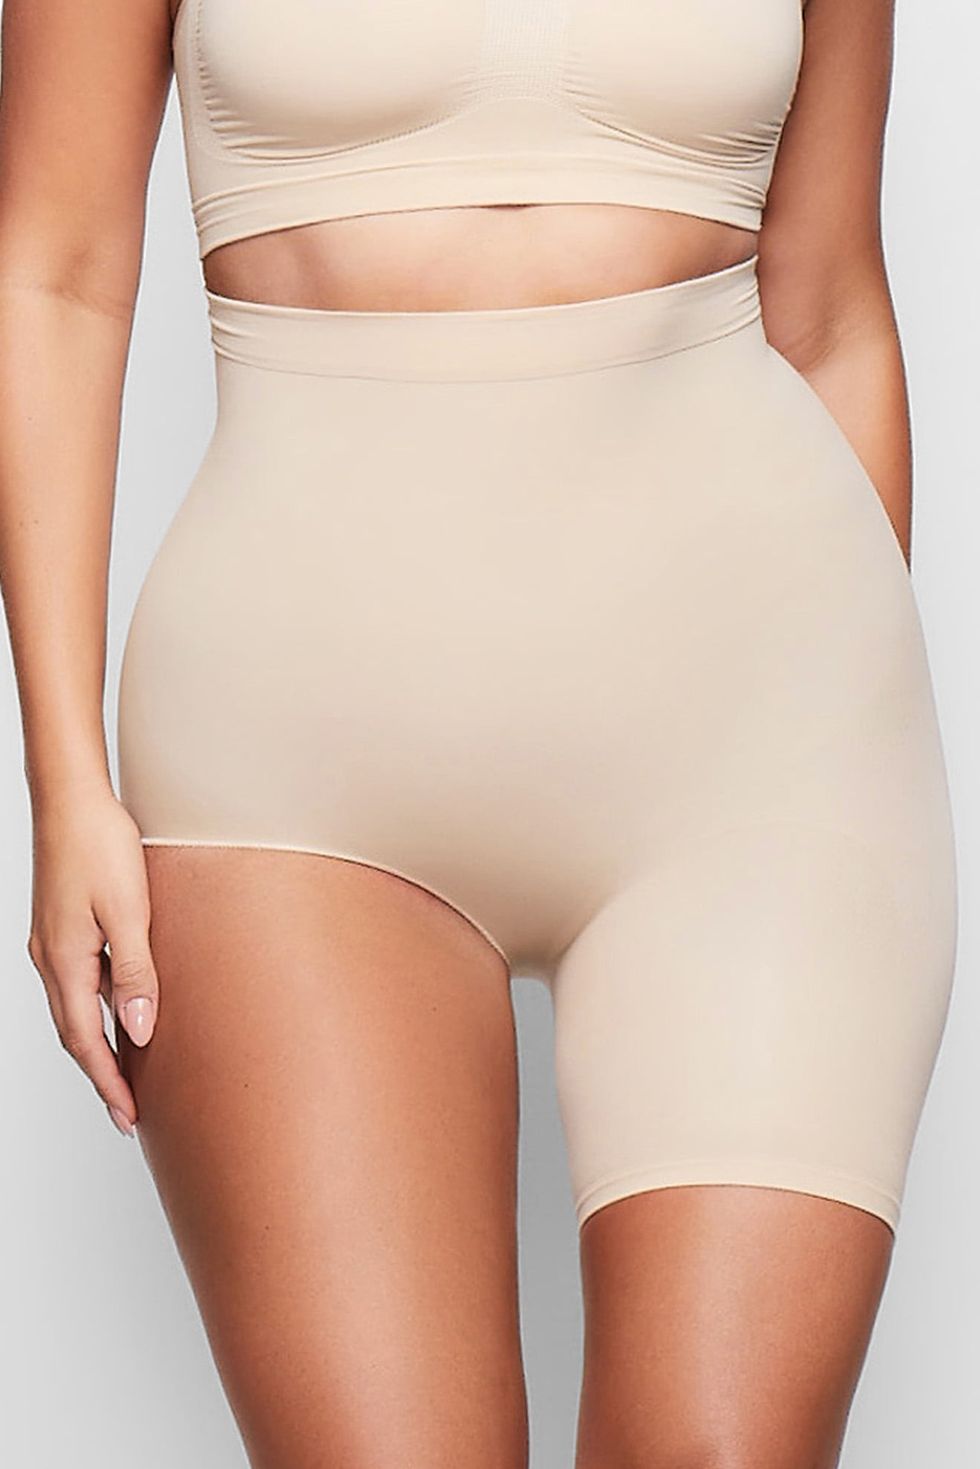 Kim Kardashian's Skims shapewear line is coming to the Middle East